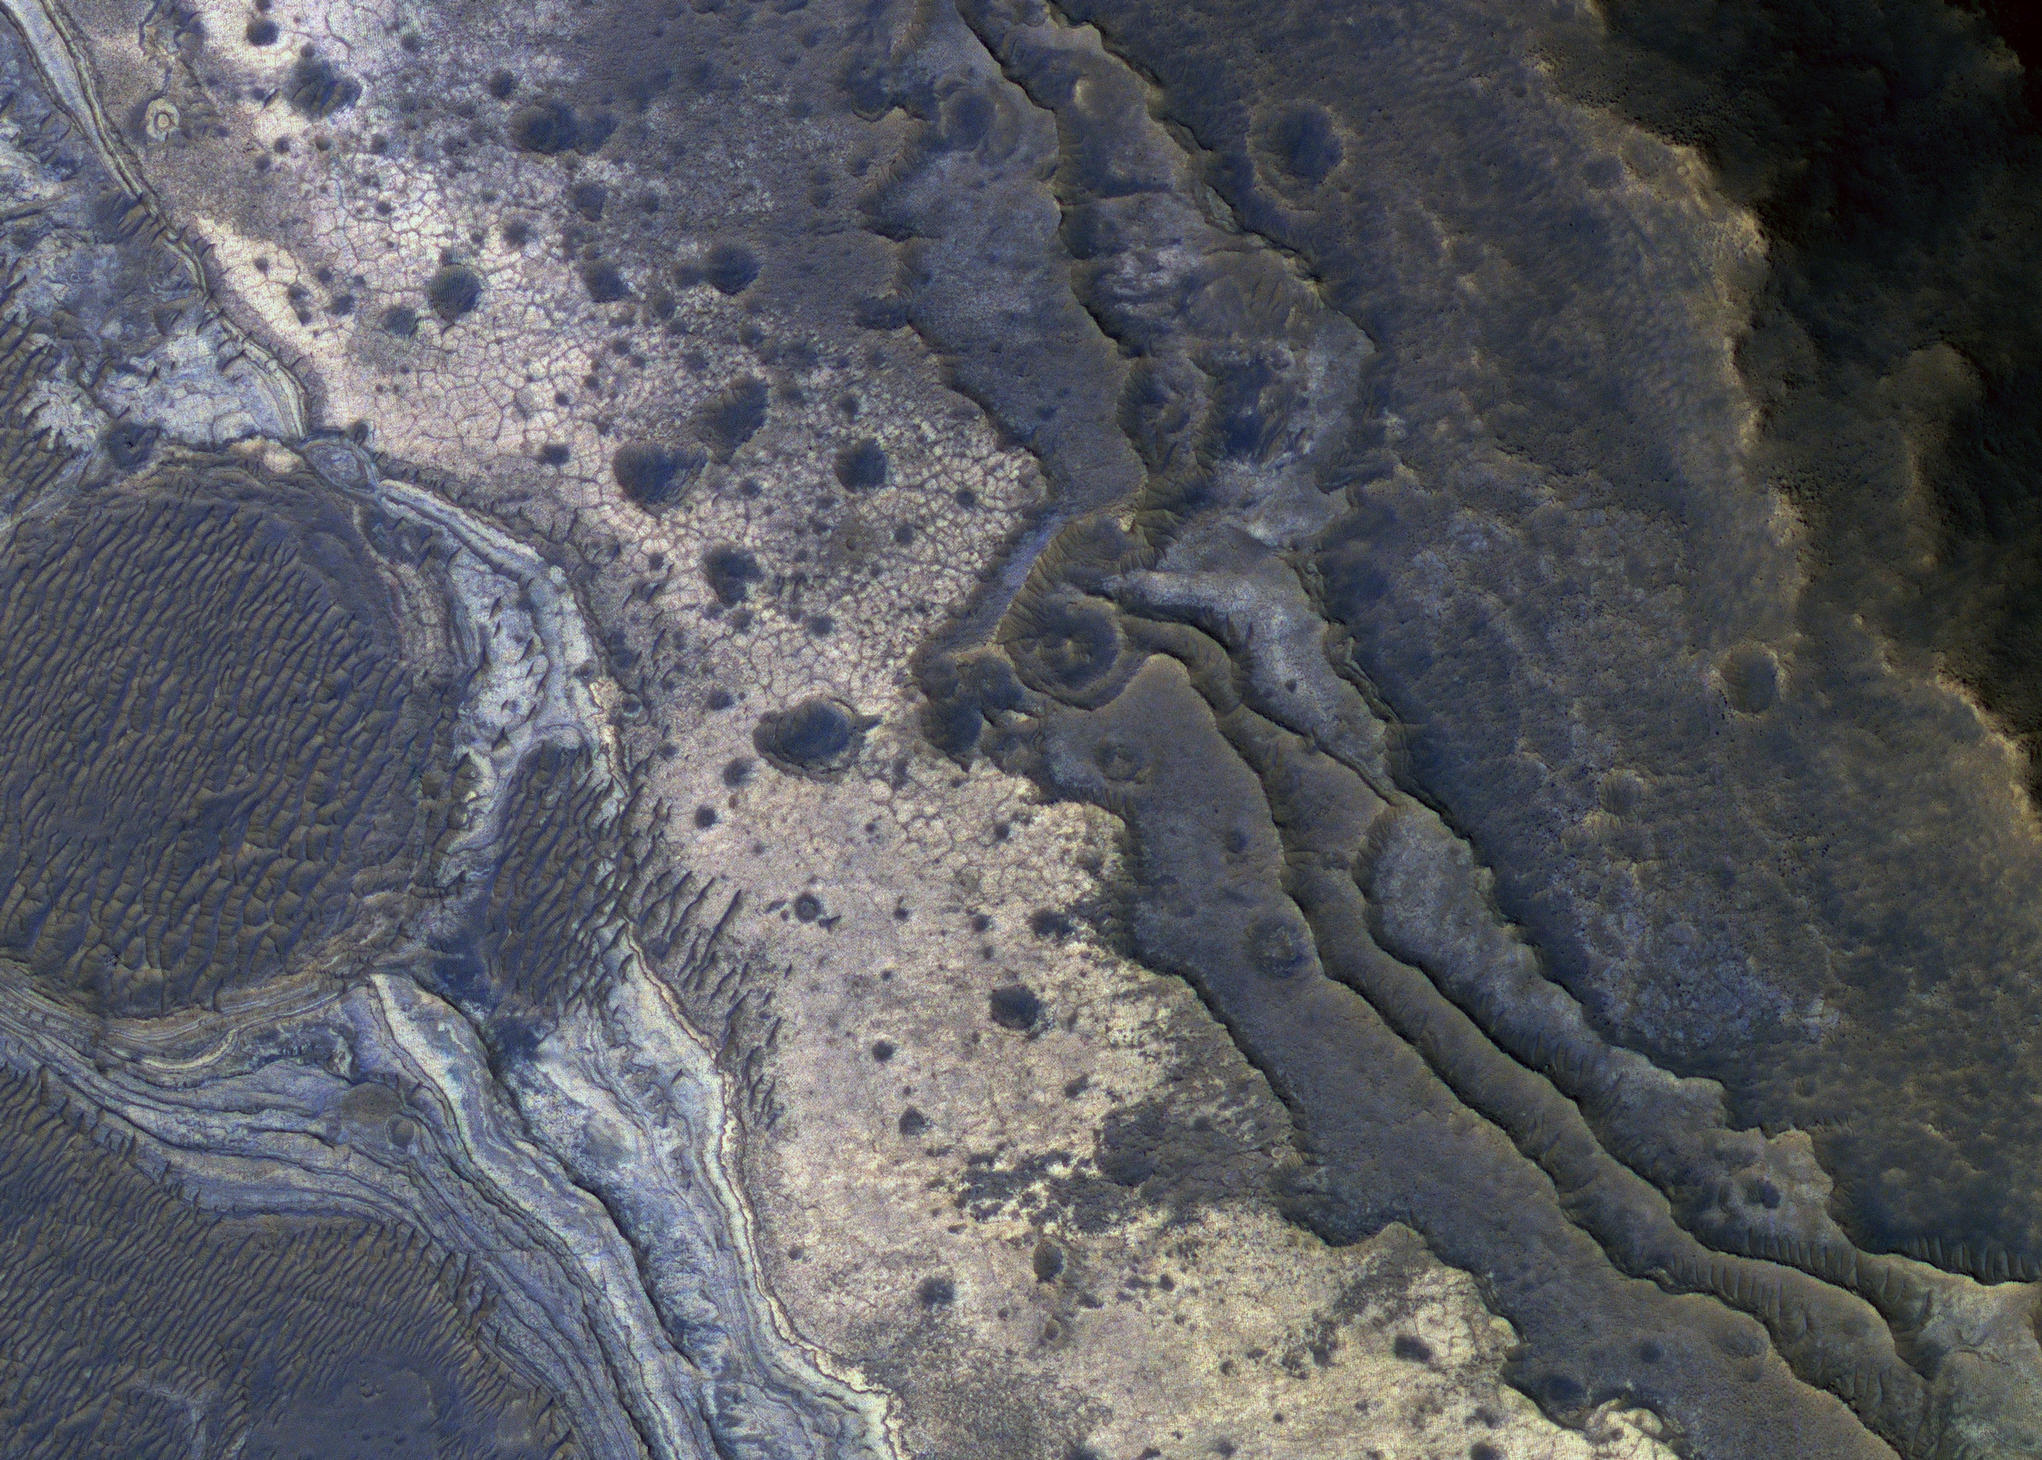 This image shows layers of rock stacked like a staircase, their edges extending diagonally from top left to bottom right and stepping downward from the lower left to the top right. At the far left of the image is an eroded, round crater filled with a row of nearly parallel sand dunes. To the right of the crater, a pinkish-colored layer of light-toned rock within the staircase contains opal.